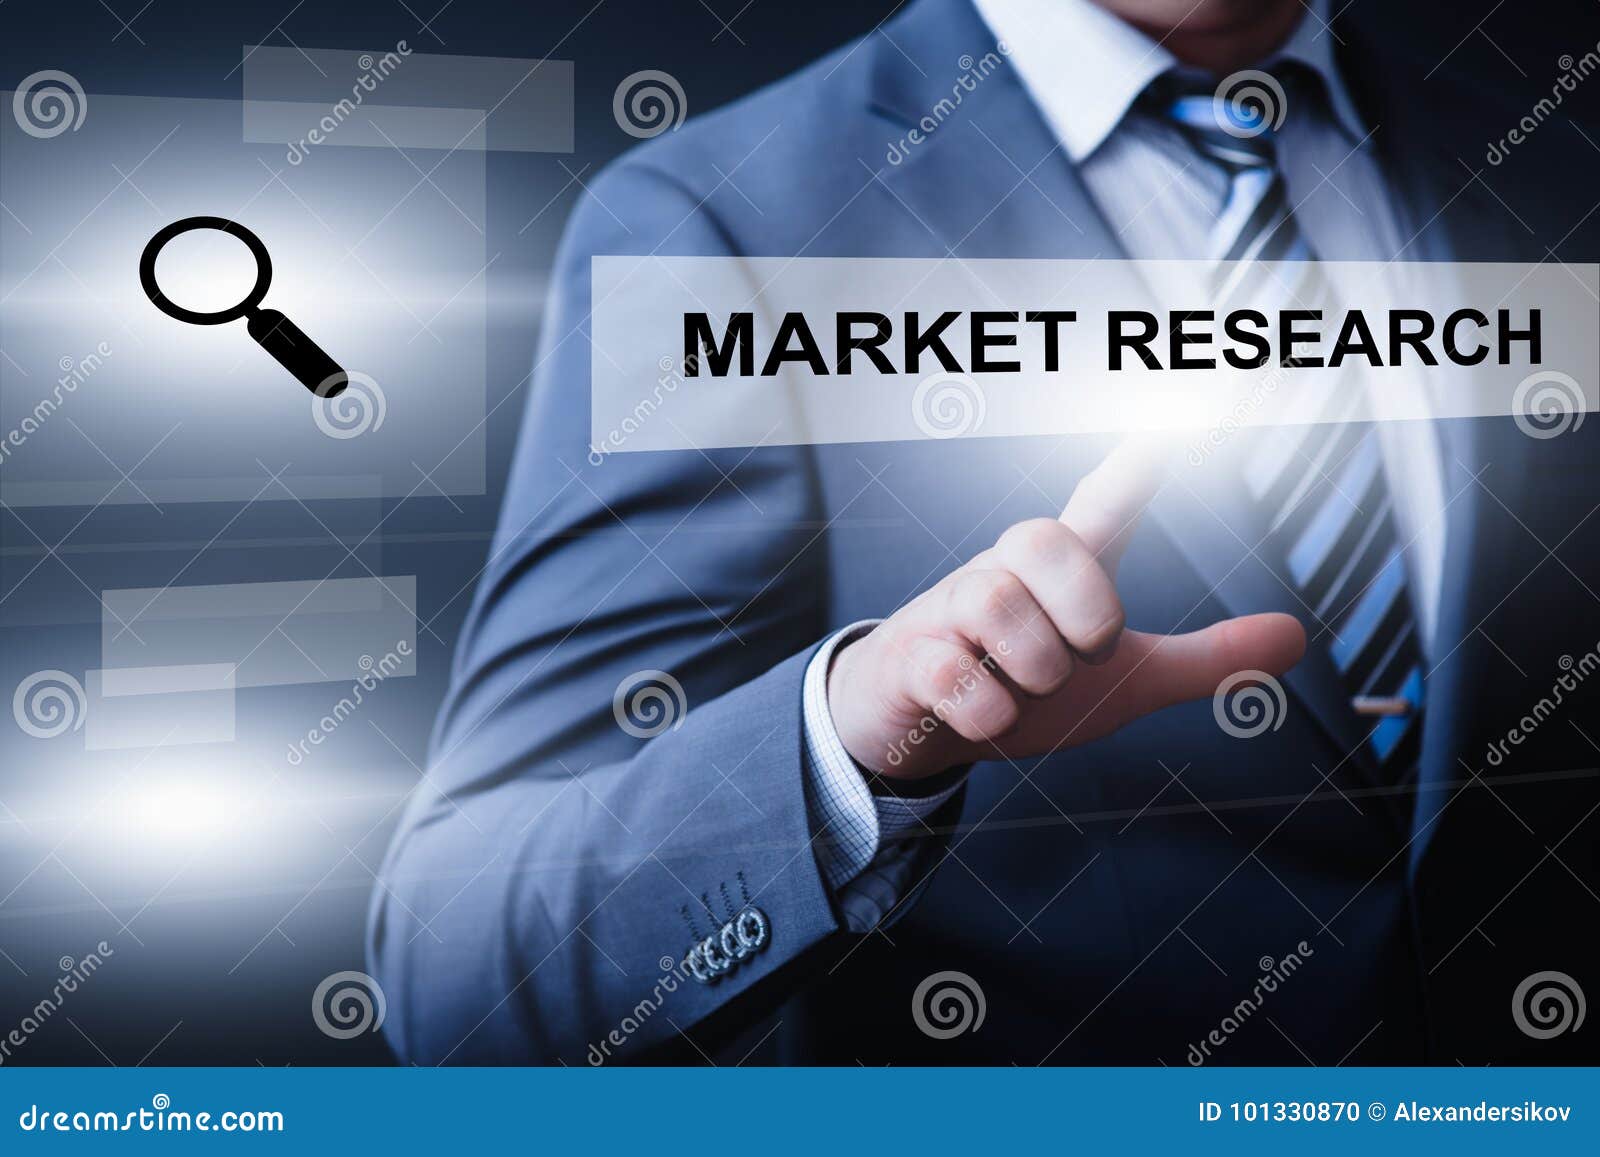 Market Research Marketing Strategy Business Technology Internet Concept ...